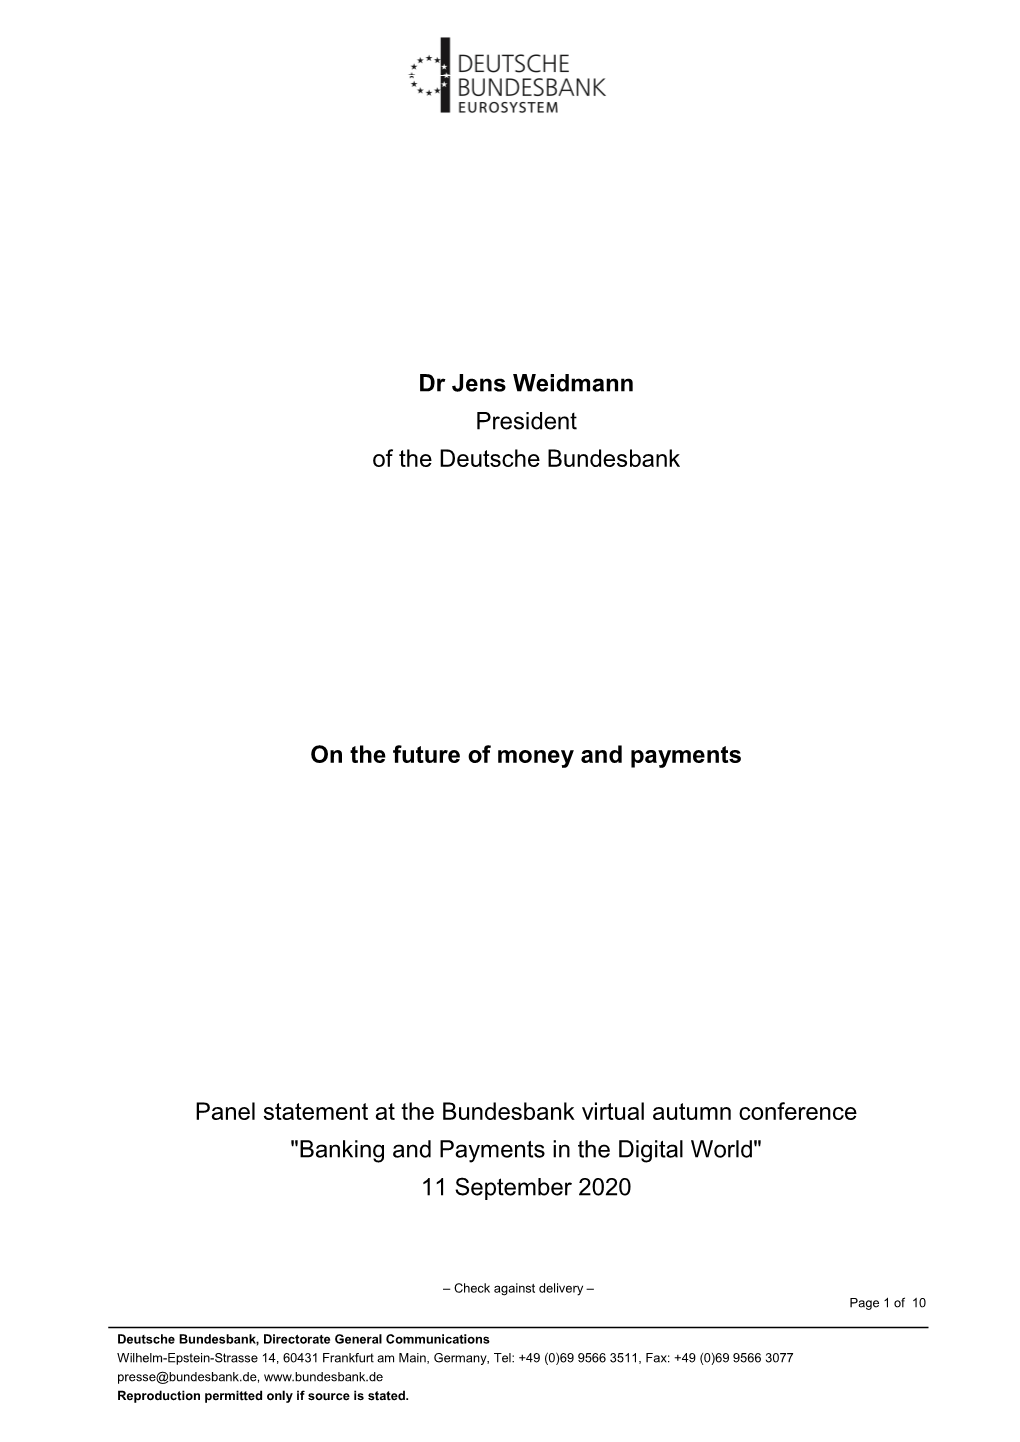 Jens Weidmann: on the Future of Money and Payments